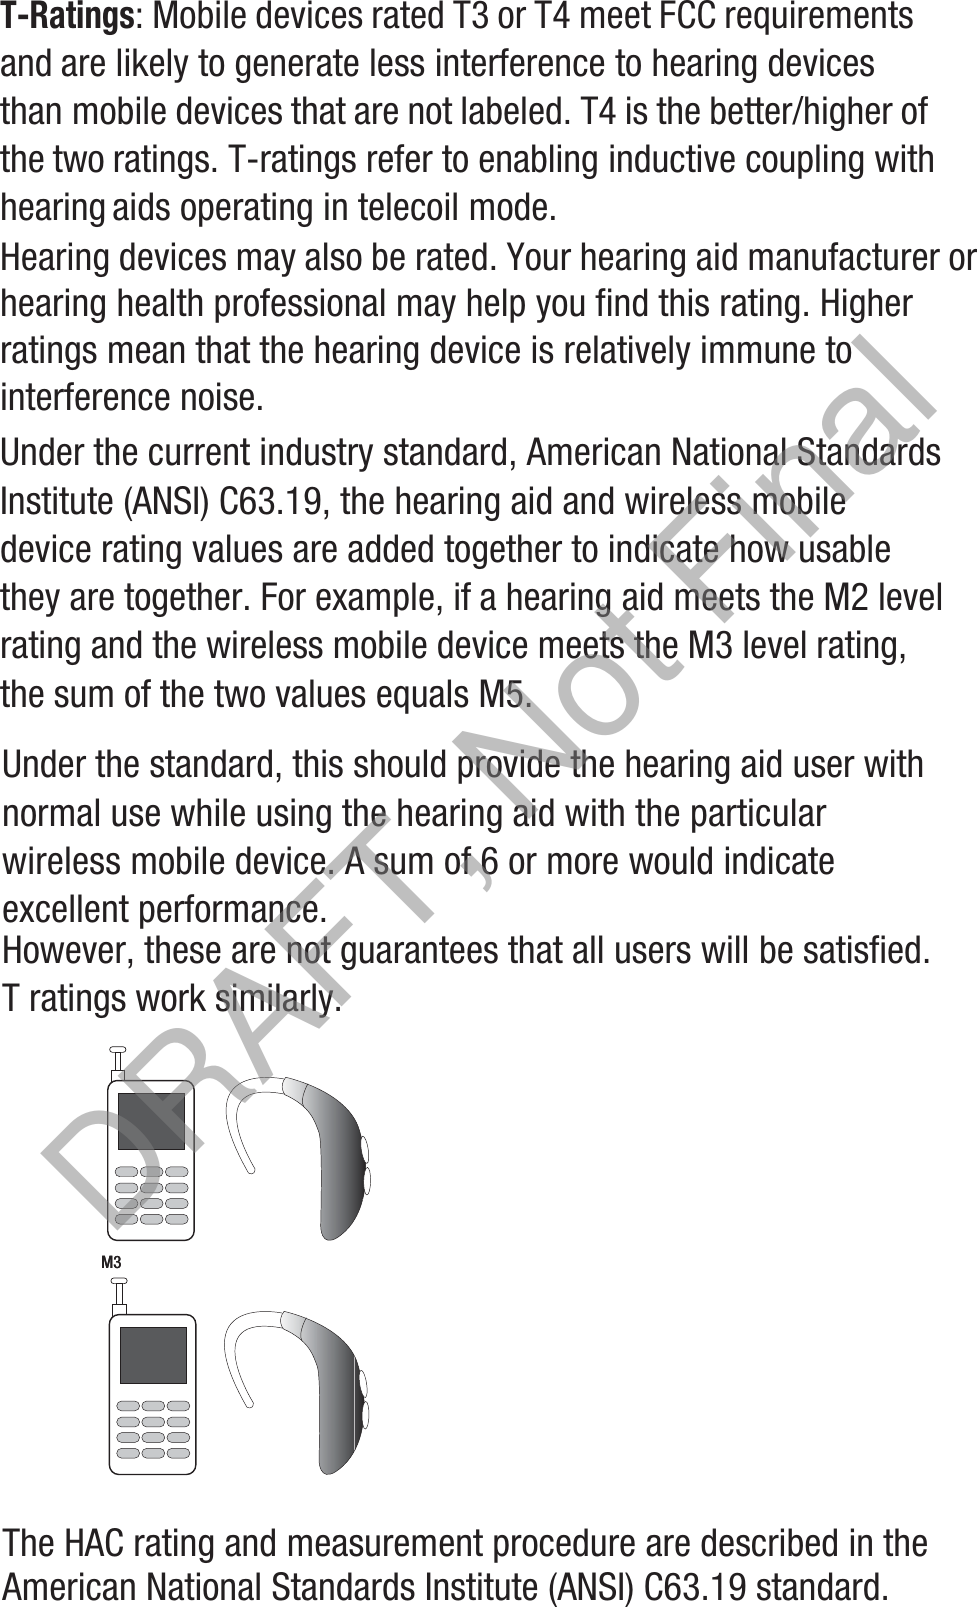 T-Ratings: Mobile devices rated T3 or T4 meet FCC requirements and are likely to generate less interference to hearing devices than mobile devices that are not labeled. T4 is the better/higher of the two ratings. T-ratings refer to enabling inductive coupling with hearing aids operating in telecoil mode.Hearing devices may also be rated. Your hearing aid manufacturer or hearing health professional may help you find this rating. Higher ratings mean that the hearing device is relatively immune to interference noise. Under the current industry standard, American National Standards Institute (ANSI) C63.19, the hearing aid and wireless mobile device rating values are added together to indicate how usable they are together. For example, if a hearing aid meets the M2 level rating and the wireless mobile device meets the M3 level rating, the sum of the two values equals M5. Under the standard, this should provide the hearing aid user with normal use while using the hearing aid with the particular wireless mobile device. A sum of 6 or more would indicate excellent performance.  However, these are not guarantees that all users will be satisfied. T ratings work similarly.The HAC rating and measurement procedure are described in the American National Standards Institute (ANSI) C63.19 standard.M3       M3DRAFT, Not Final